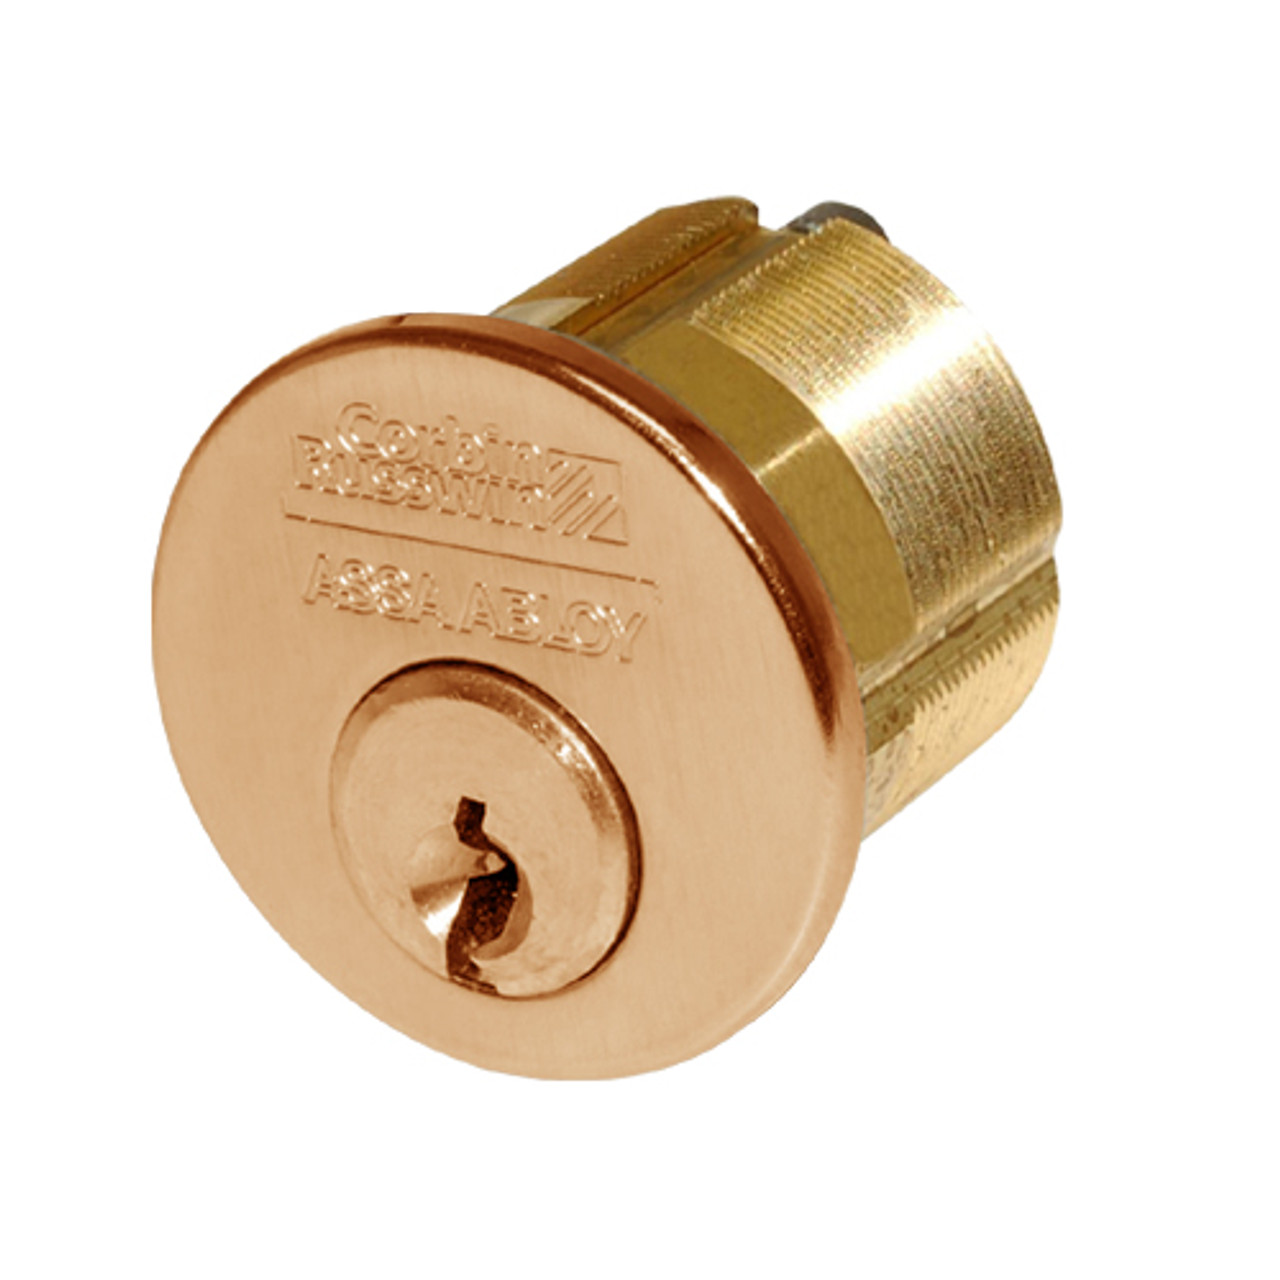 CR1000-200-A06-6-59A1-612 Corbin Conventional Mortise Cylinder for Mortise Lock and DL3000 Deadlocks with Schlage L9000 Cam in Satin Bronze Finish